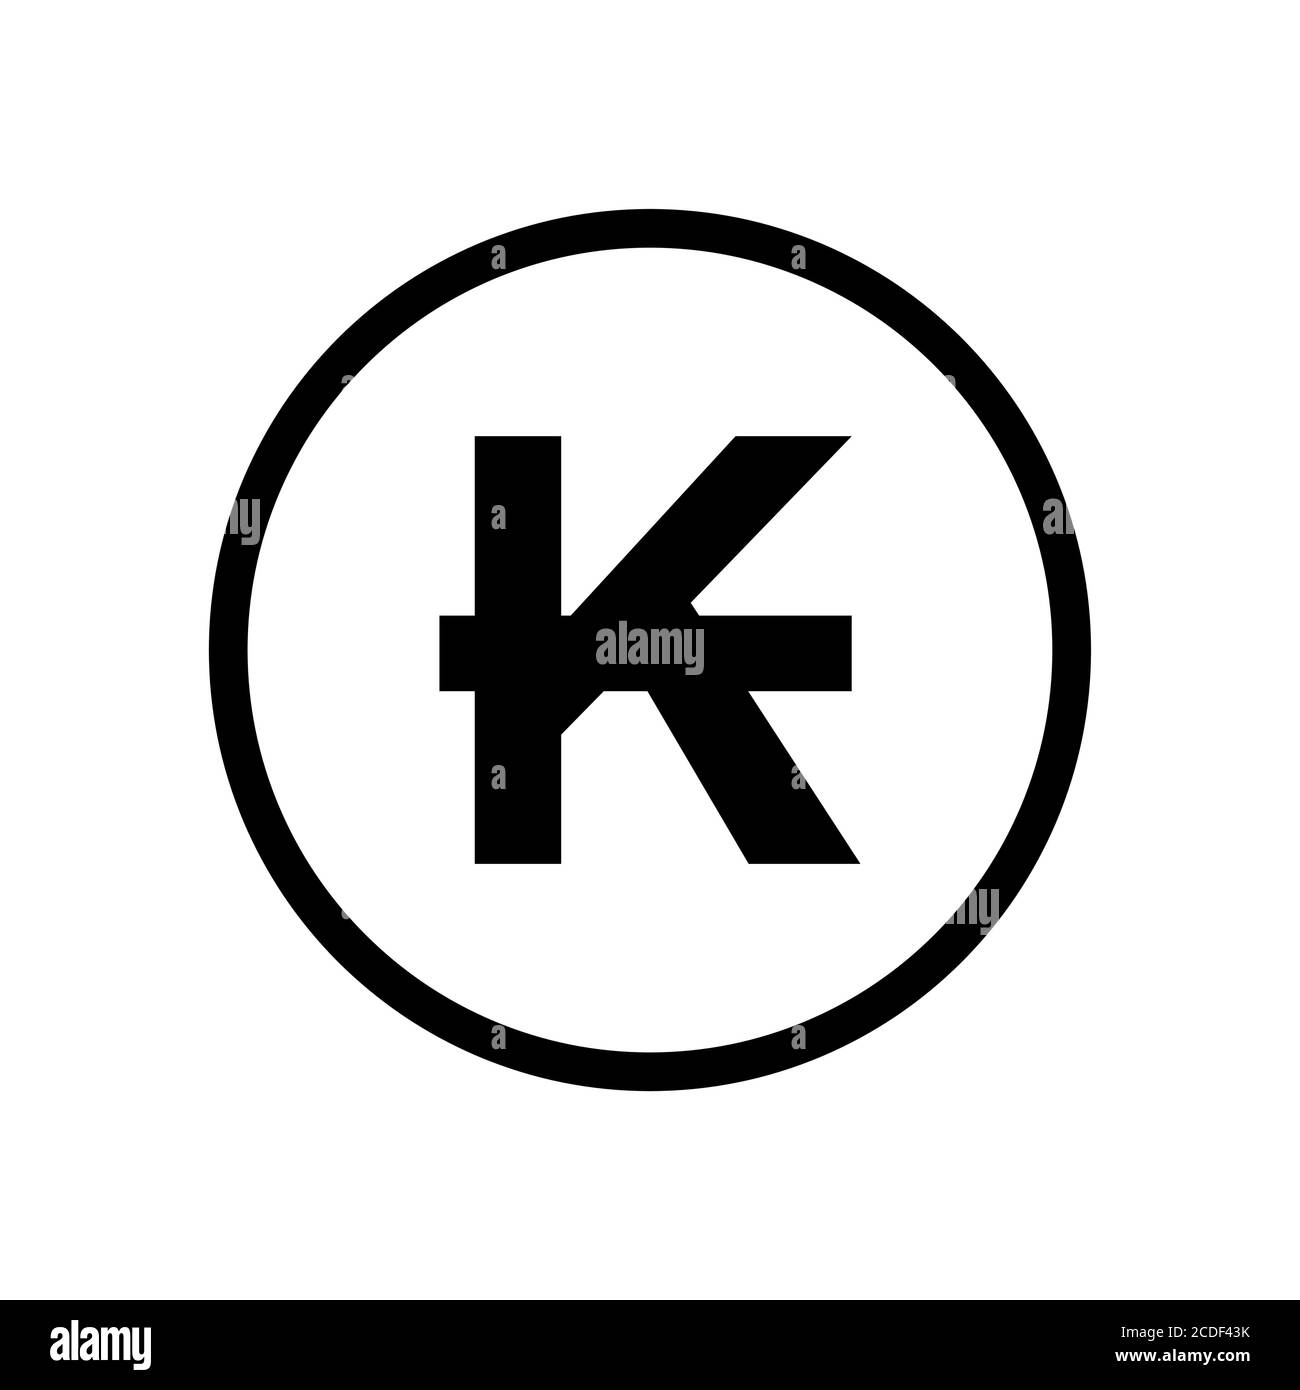 Kip coin monochrome black and white icon. Current currency symbol. Stock Vector